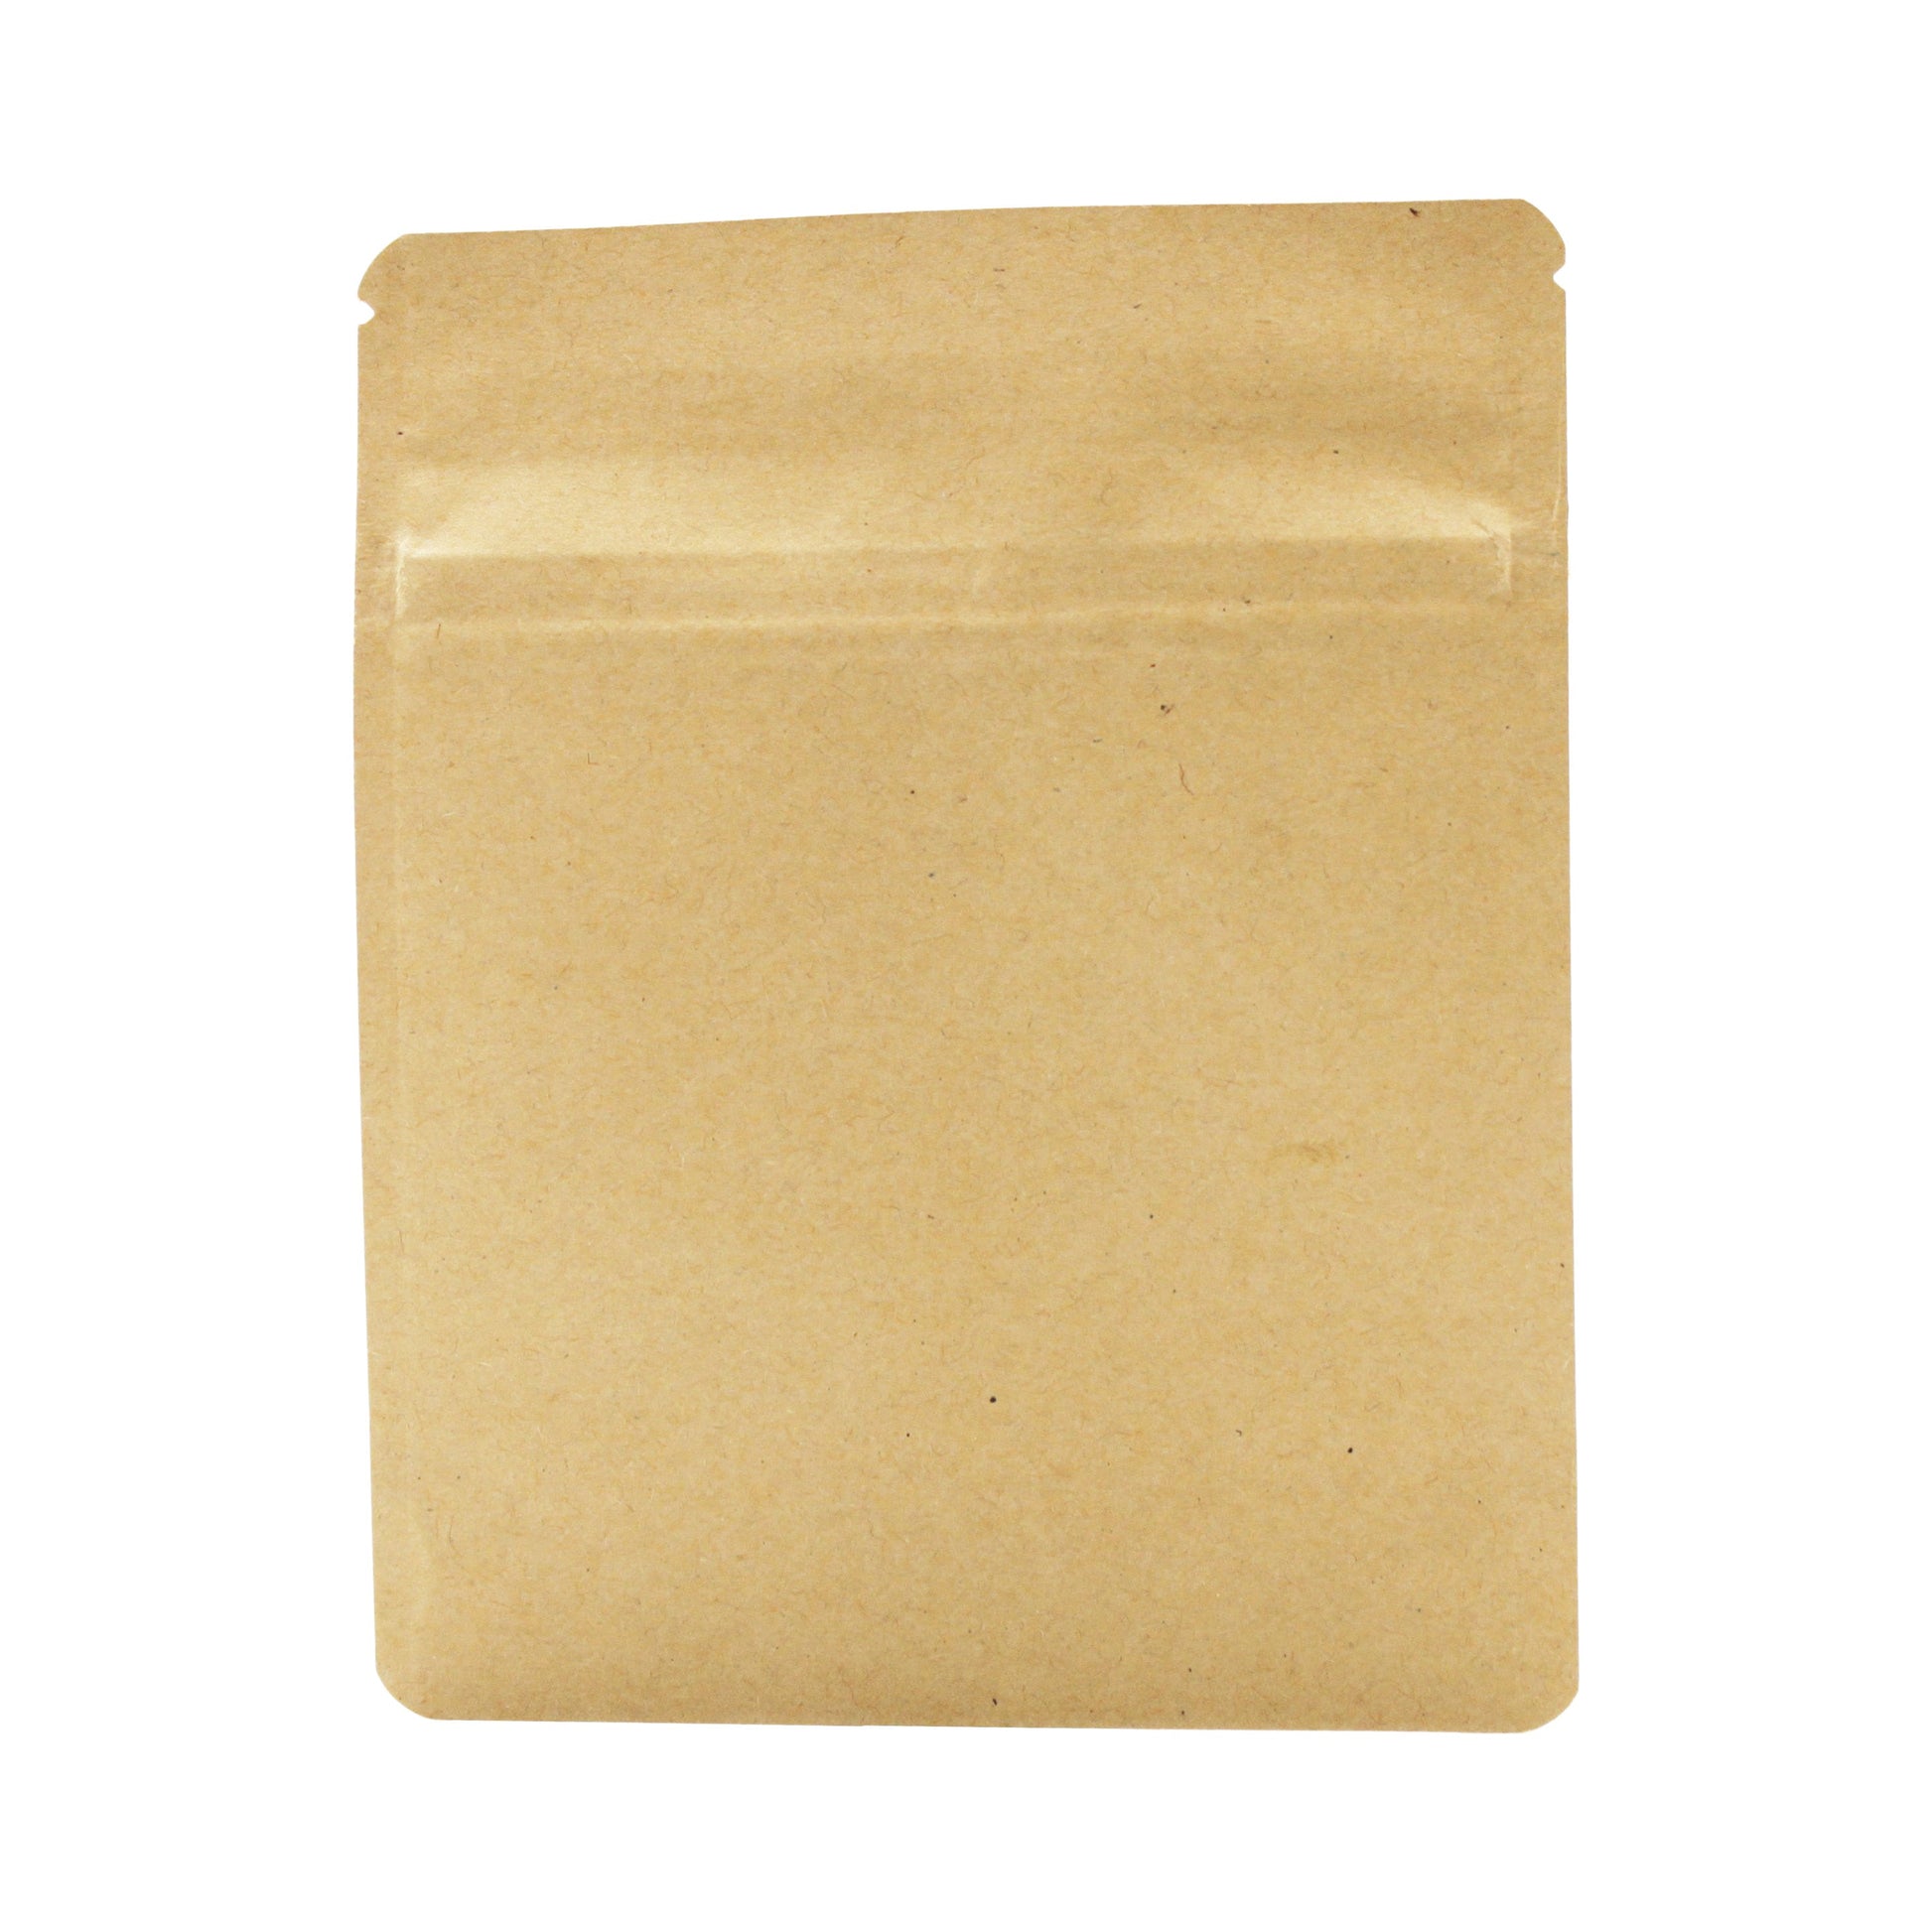 Bag King Child-Resistant Opaque Wide Mouth Kraft Bag (1/4th oz) 4.7” x 5.9”